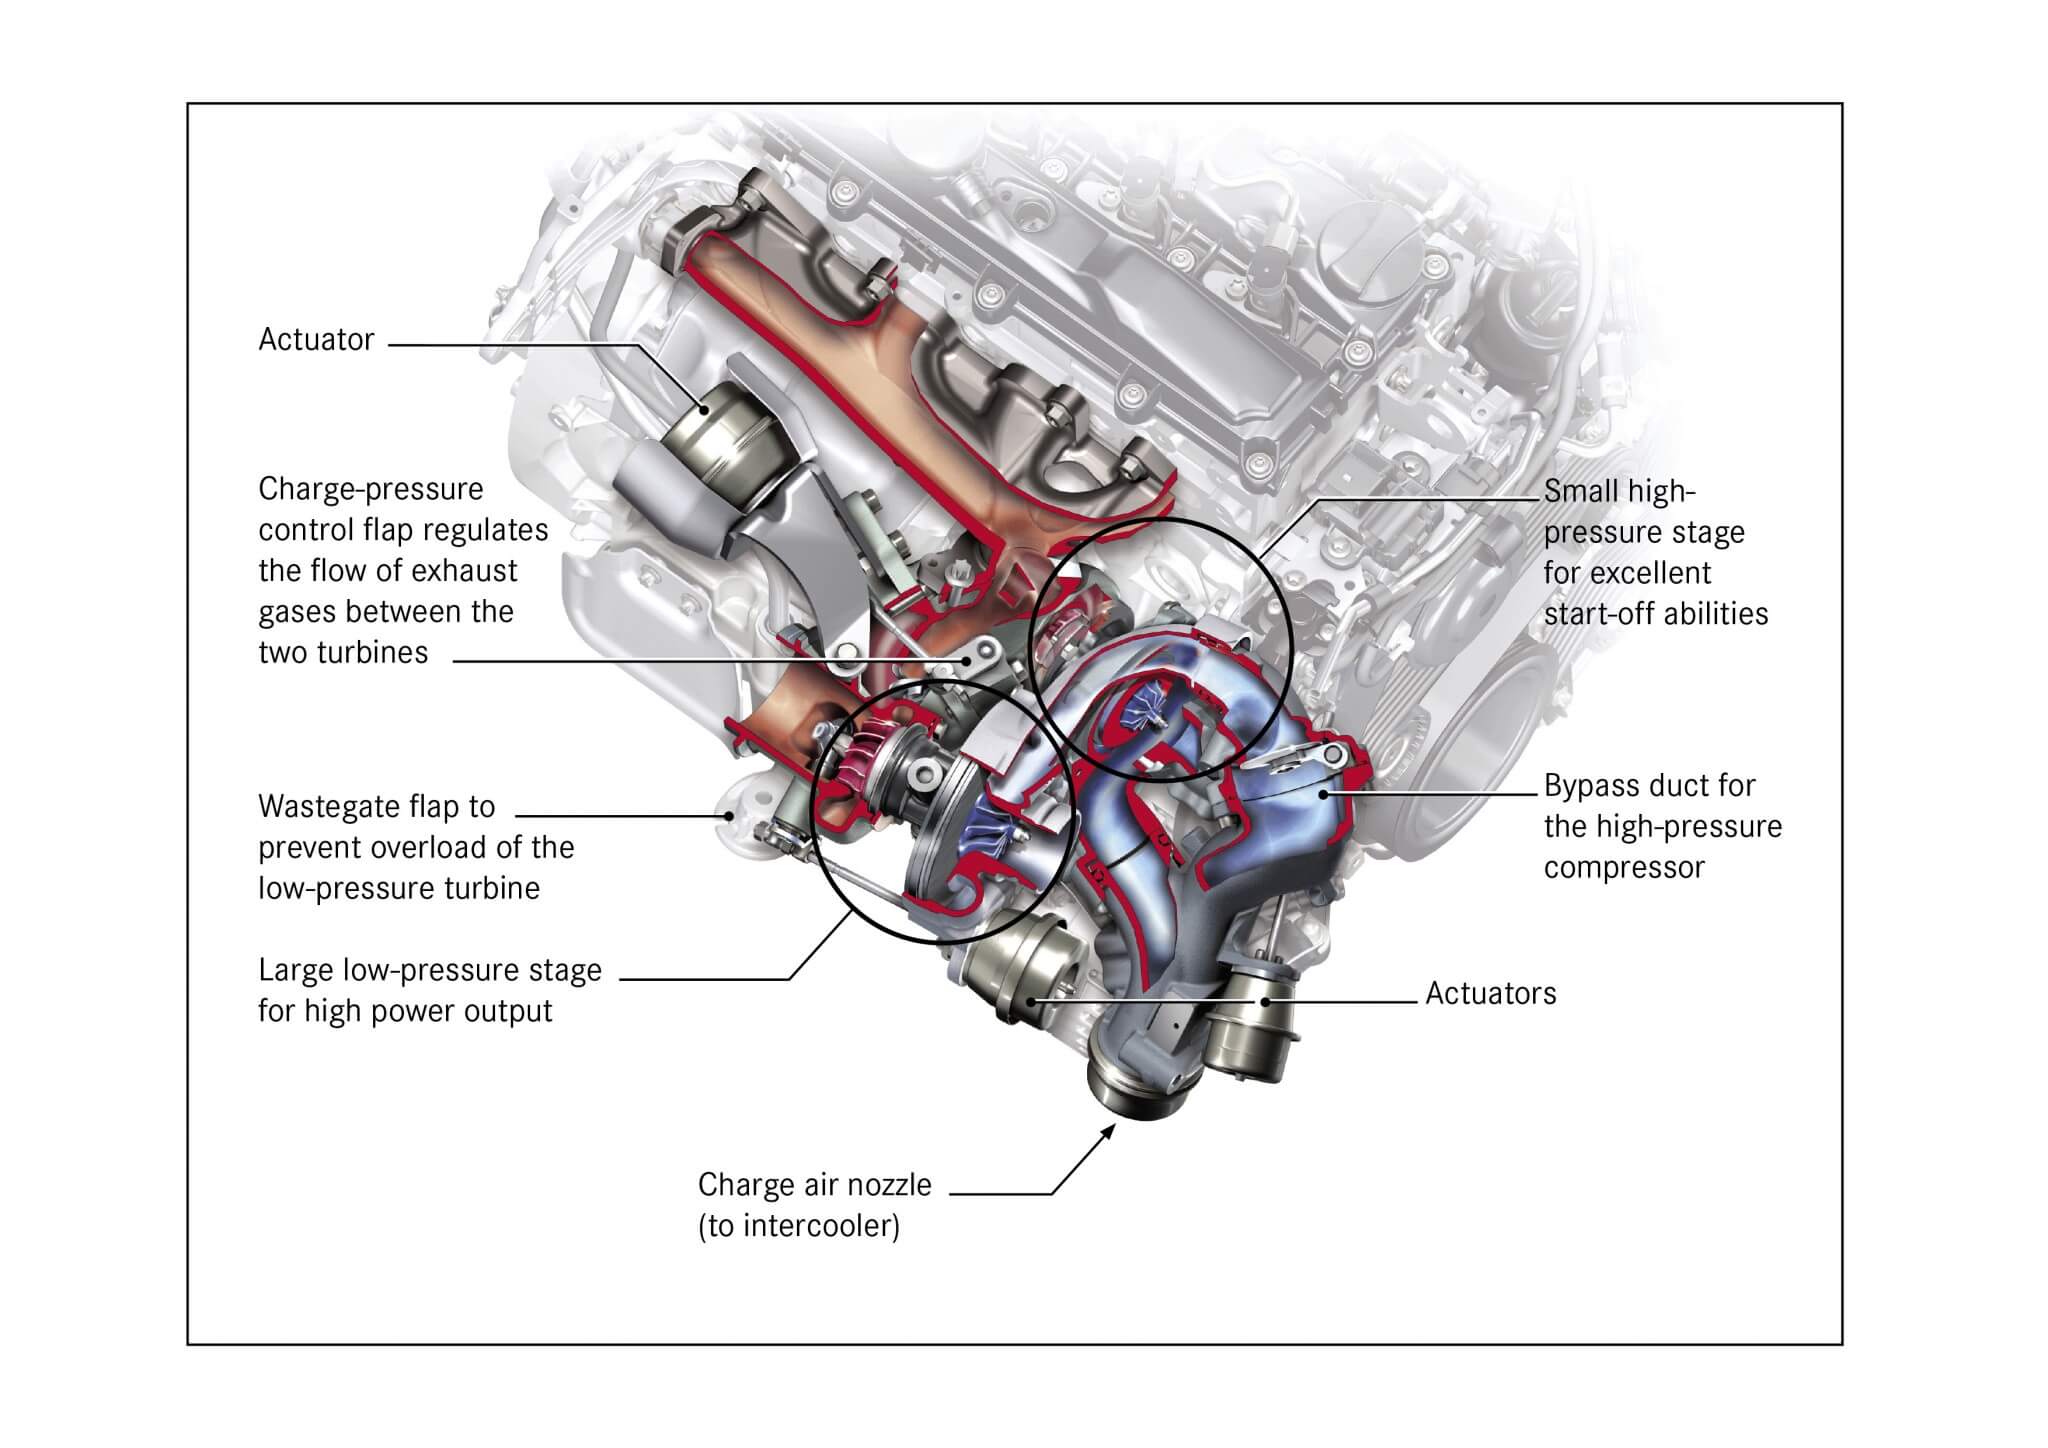 The MB OM651’s turbo’s two stages are connected in series, with the high-pressure stage located directly at the exhaust manifold and the low-pressure stage is downstream. Maximum revs are said to be 215,000, with a vacuum-operated bypass duct. With the bypass closed, the BorgWarner turbo develops plenty of boost, even at low engine speeds. Once the wastegate opens, gas flow reconverges downstream, driving the low-pressure turbine. The intake side is equally dual, air flowing first into a low-pressure compressor with the compressed air further compressed in the hp stage. Air is cooled by a charge air cooler (intercooler) capable of dropping charge air temperatures by more than 280° F. The result is more power, better fuel economy, practically zero throttle or turbo lag, and buckets of torque.